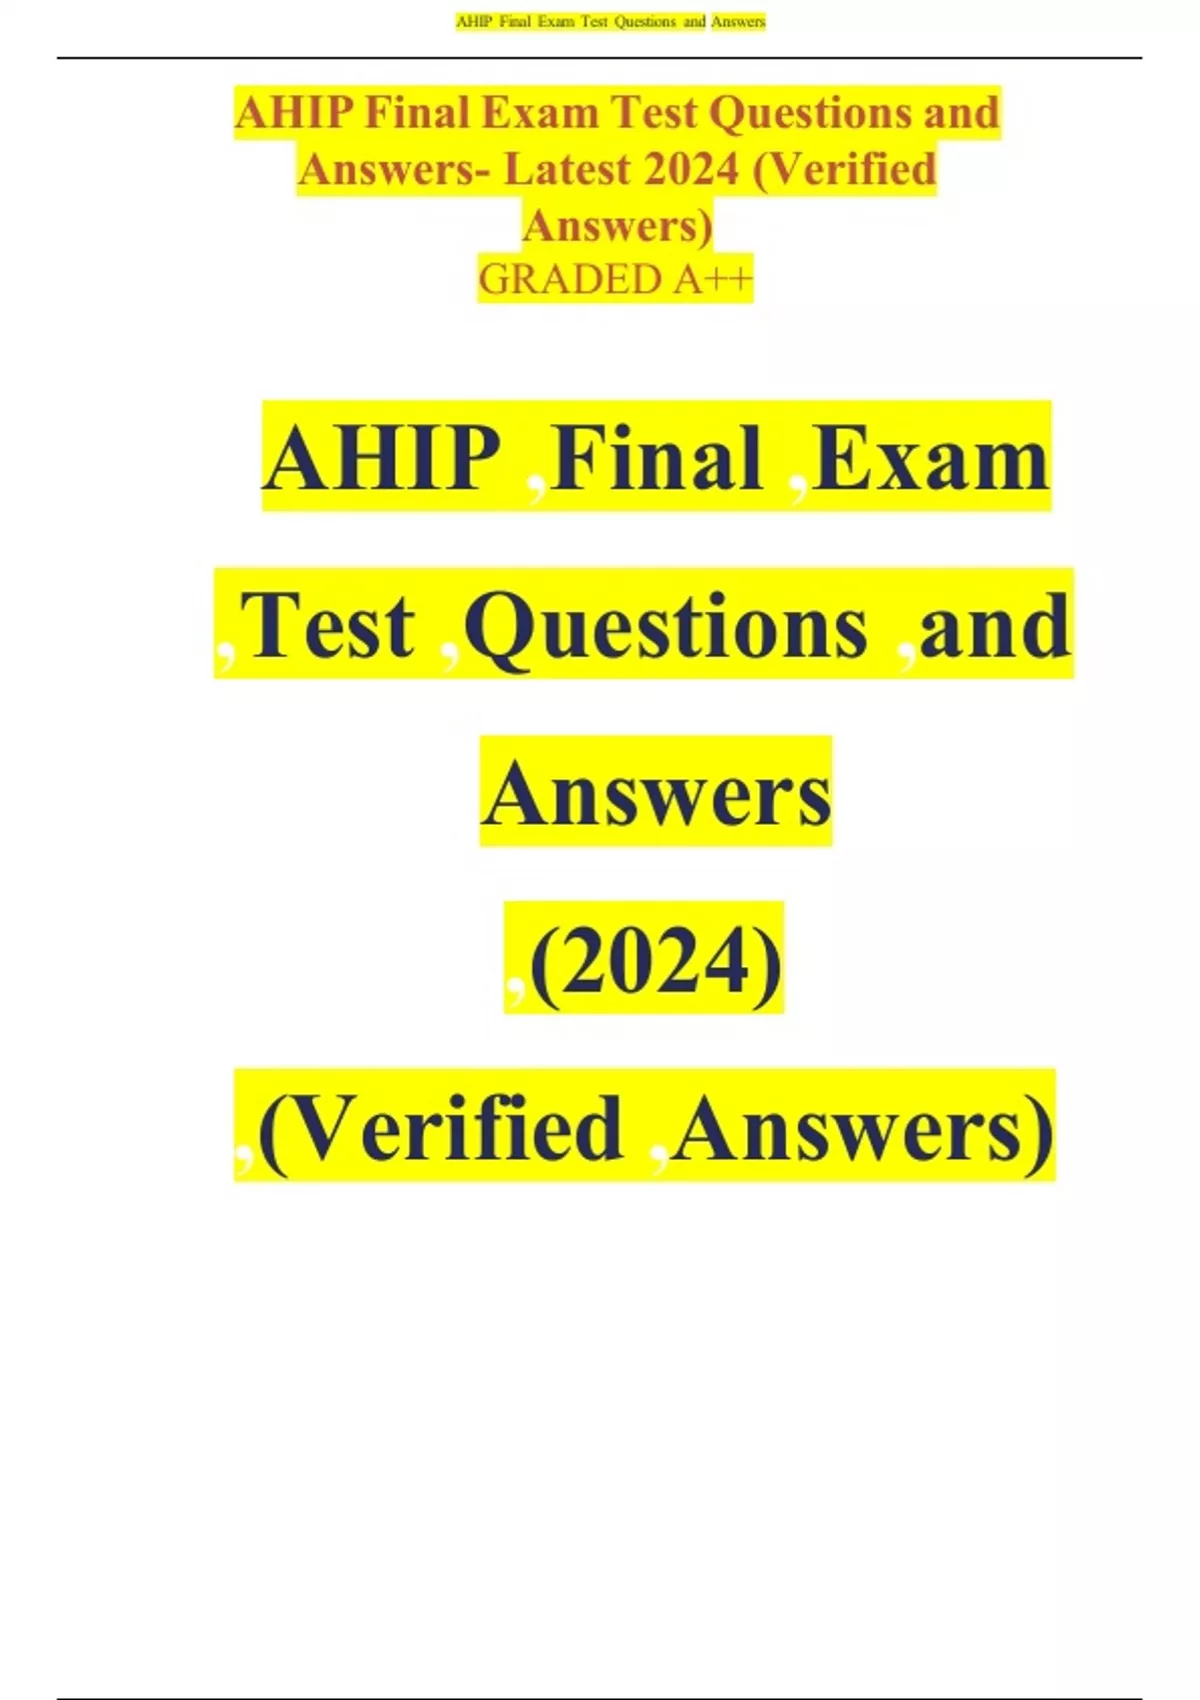 AHIP 2023/2024 Final Exam Test Updated Questions and Answers with 100